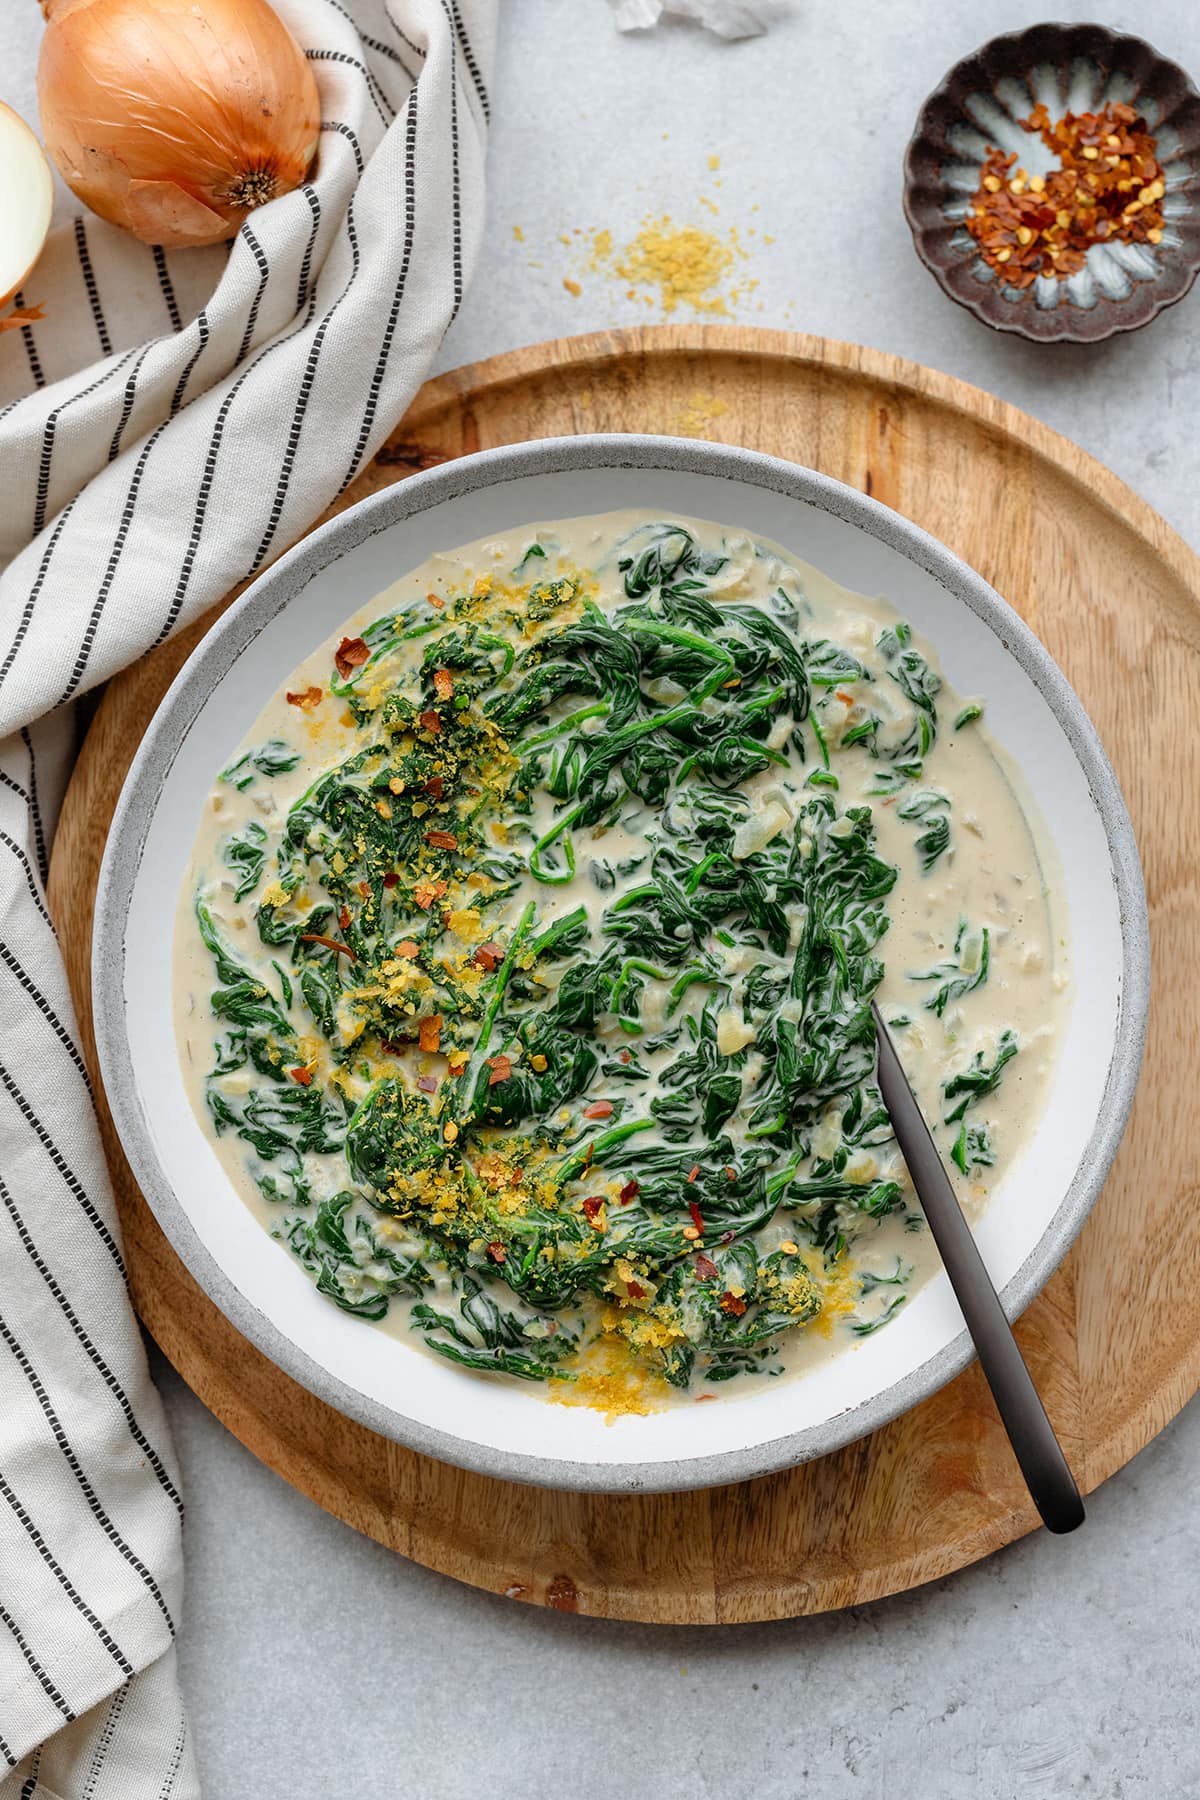 Creamy spinach served on a grey white ceramic plate sprinkled with nutritional yeast and chili flakes.